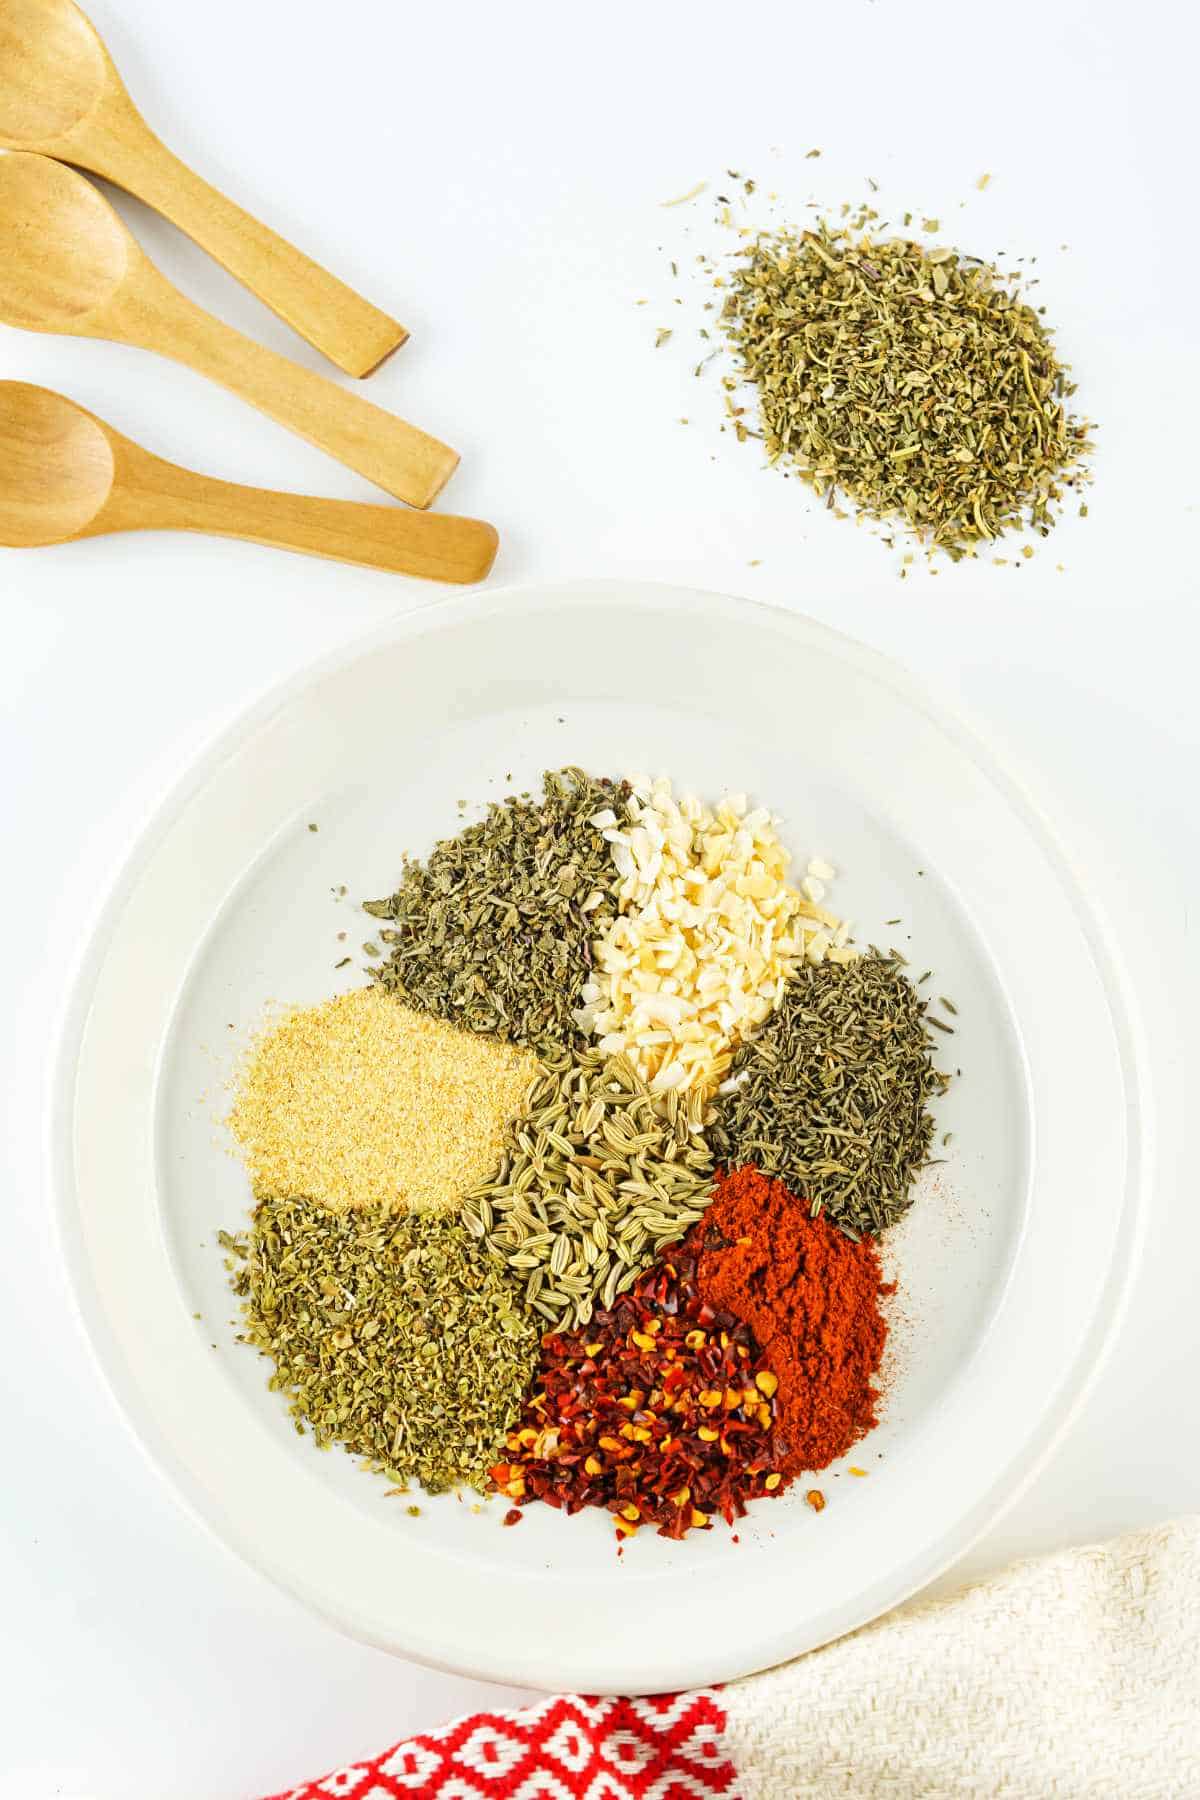 shallow bowl filled with piles of colorful spices and dried herbs.